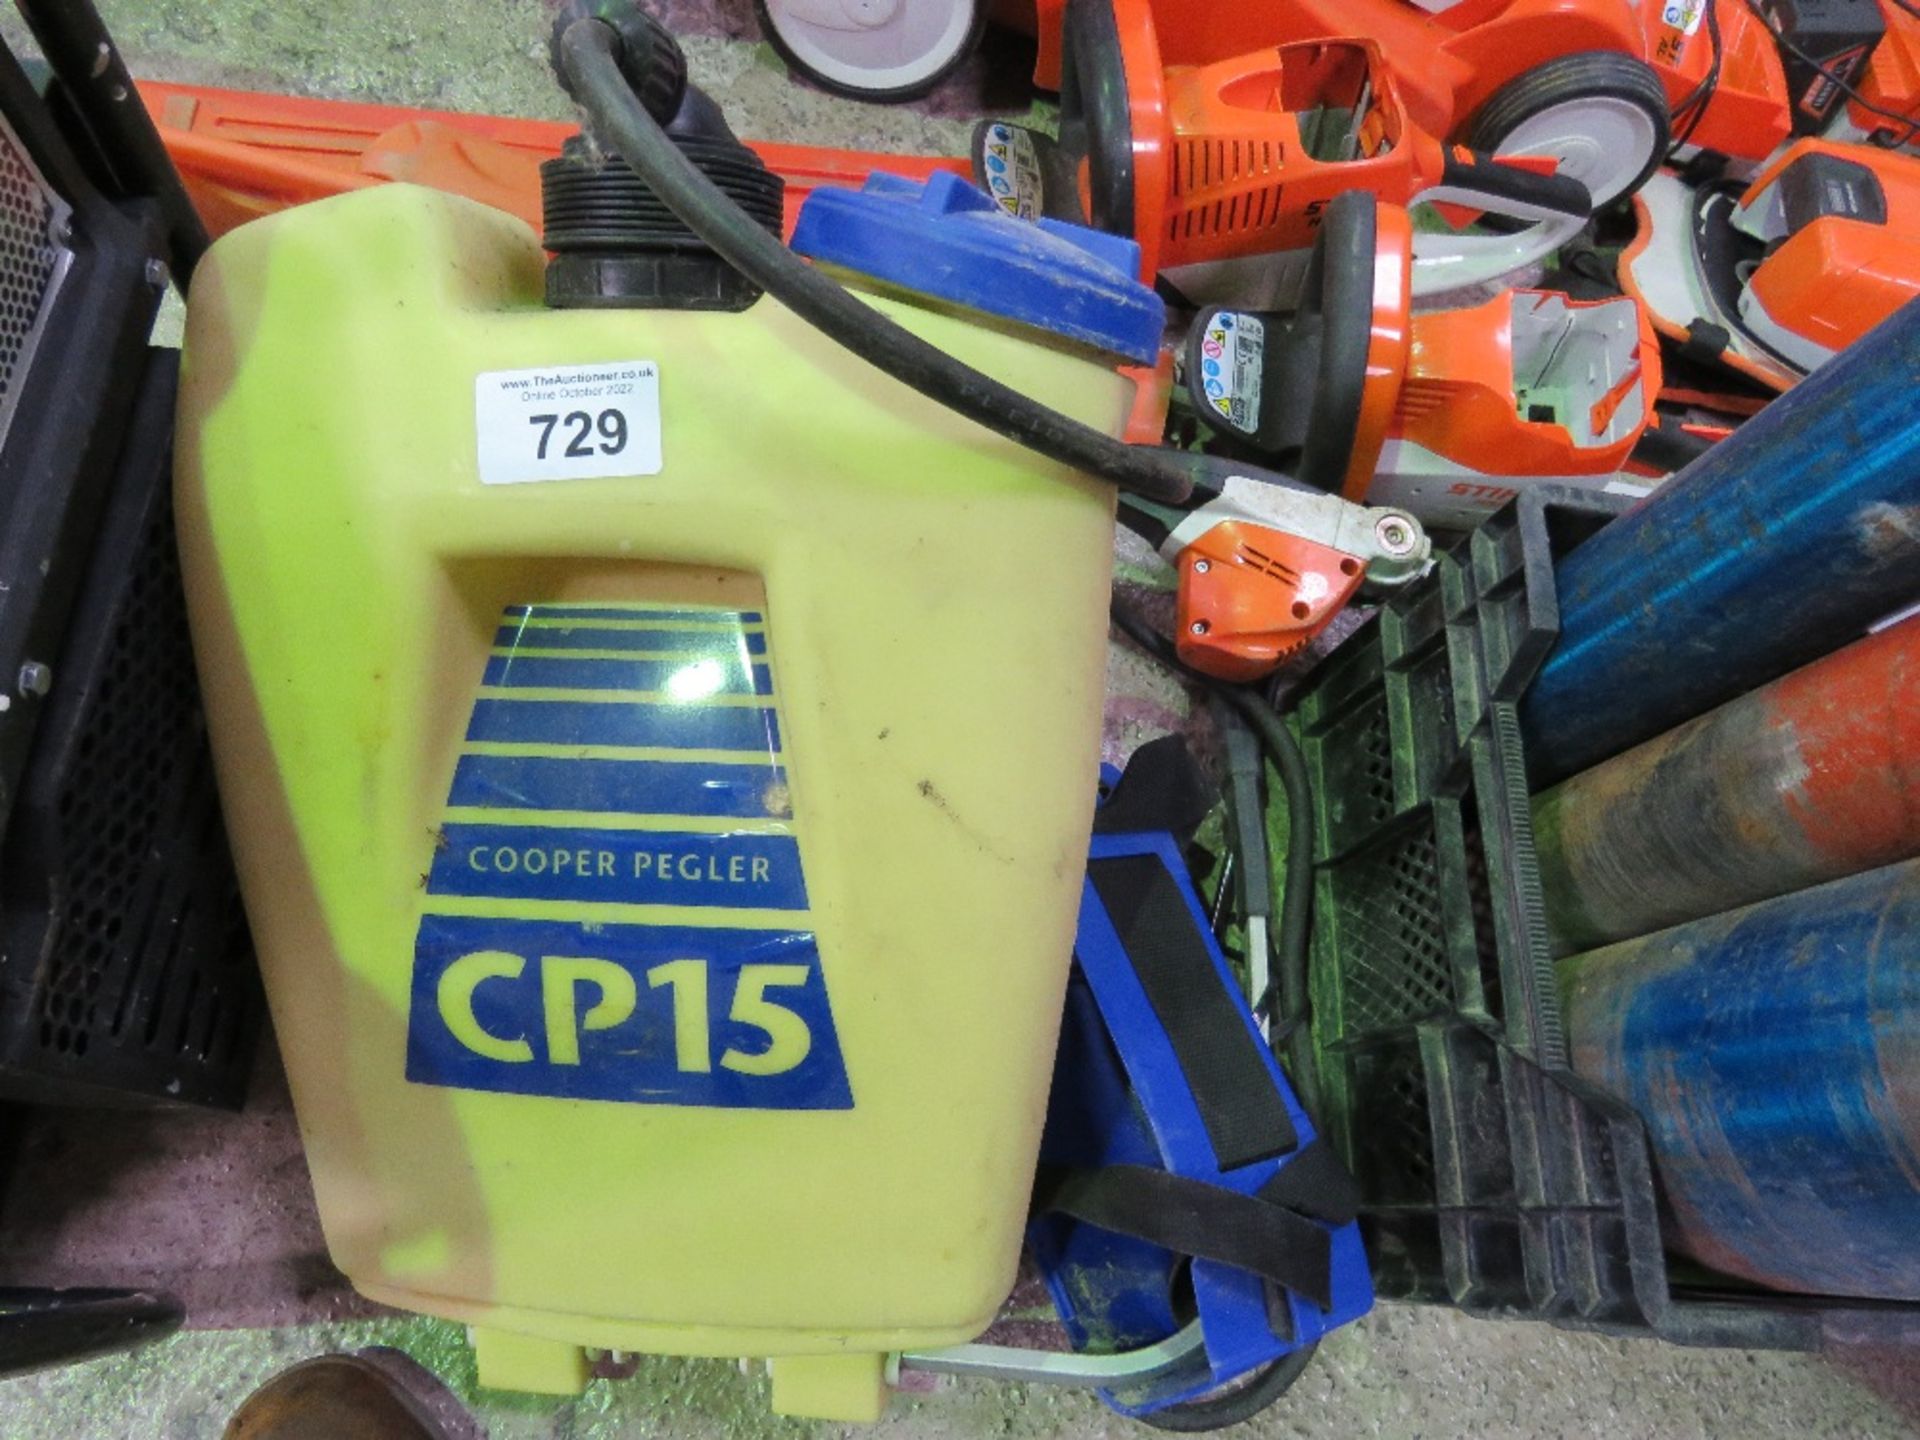 CP15 KNAPSACK SPRAYER. DIRECT FROM LOCAL COMPANY WHO ARE CLOSING THE LANDSCAPE MAINTENANCE PART OF T